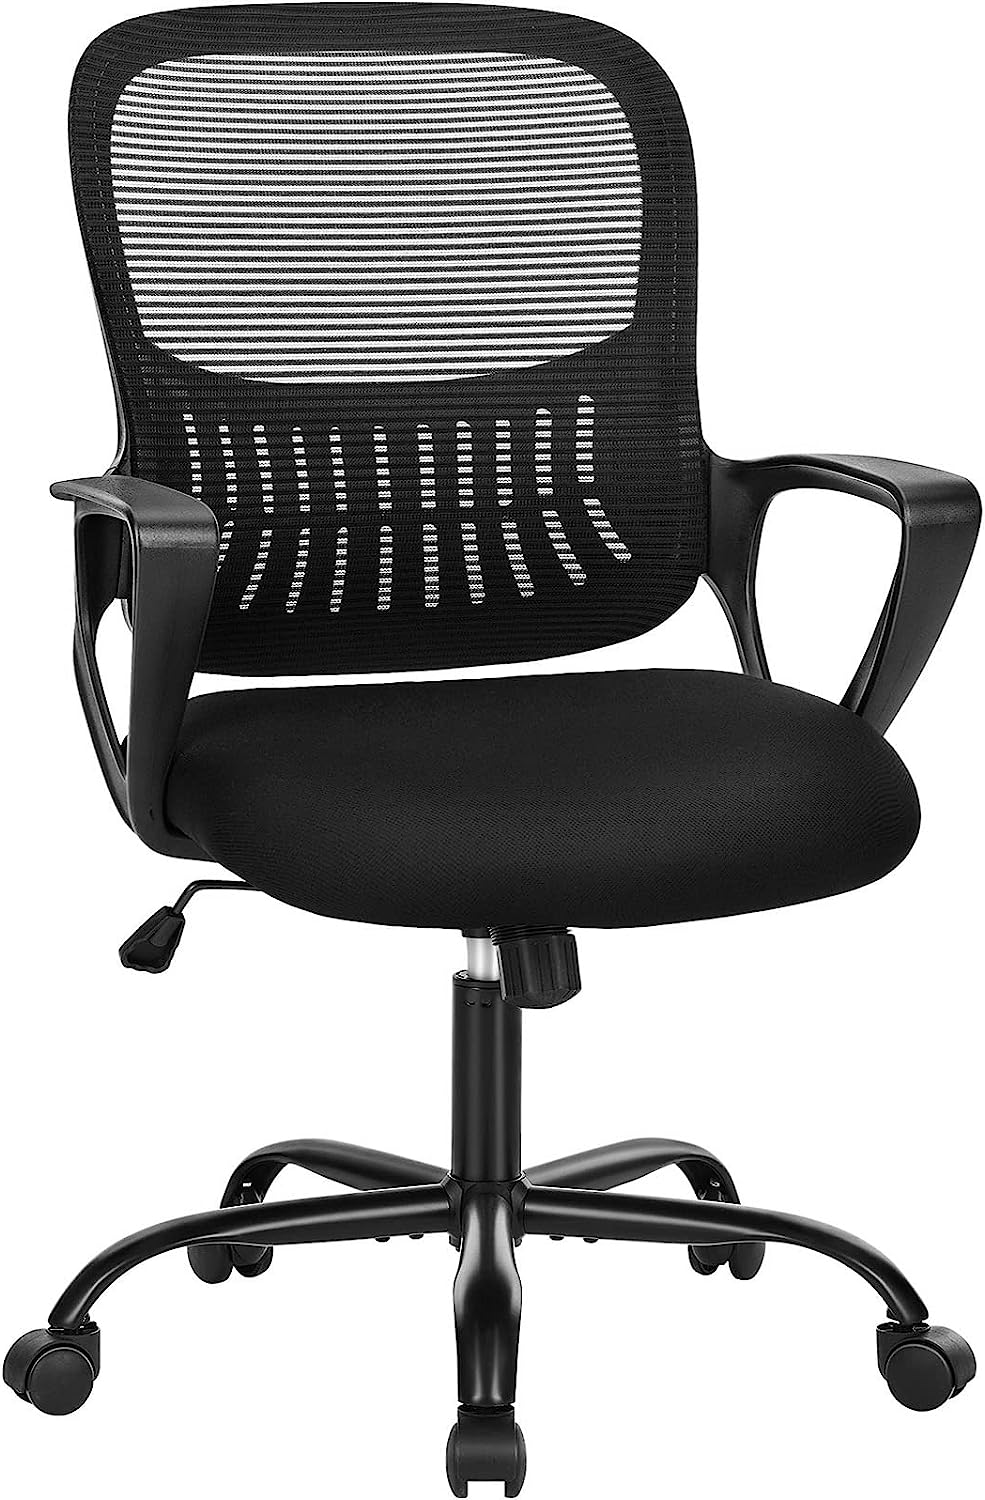 https://bigbigmart.com/wp-content/uploads/2023/12/SMUG-Office-Computer-Desk-Chair-Ergonomic-Mid-Back-Mesh-Rolling-Work-Swivel-Task-Chairs-with-Wheels-Comfortable-Lumbar-Support-Comfy-Arms-for-Home-Bedroom-Study-Dorm-Student-Adults-Black.jpg